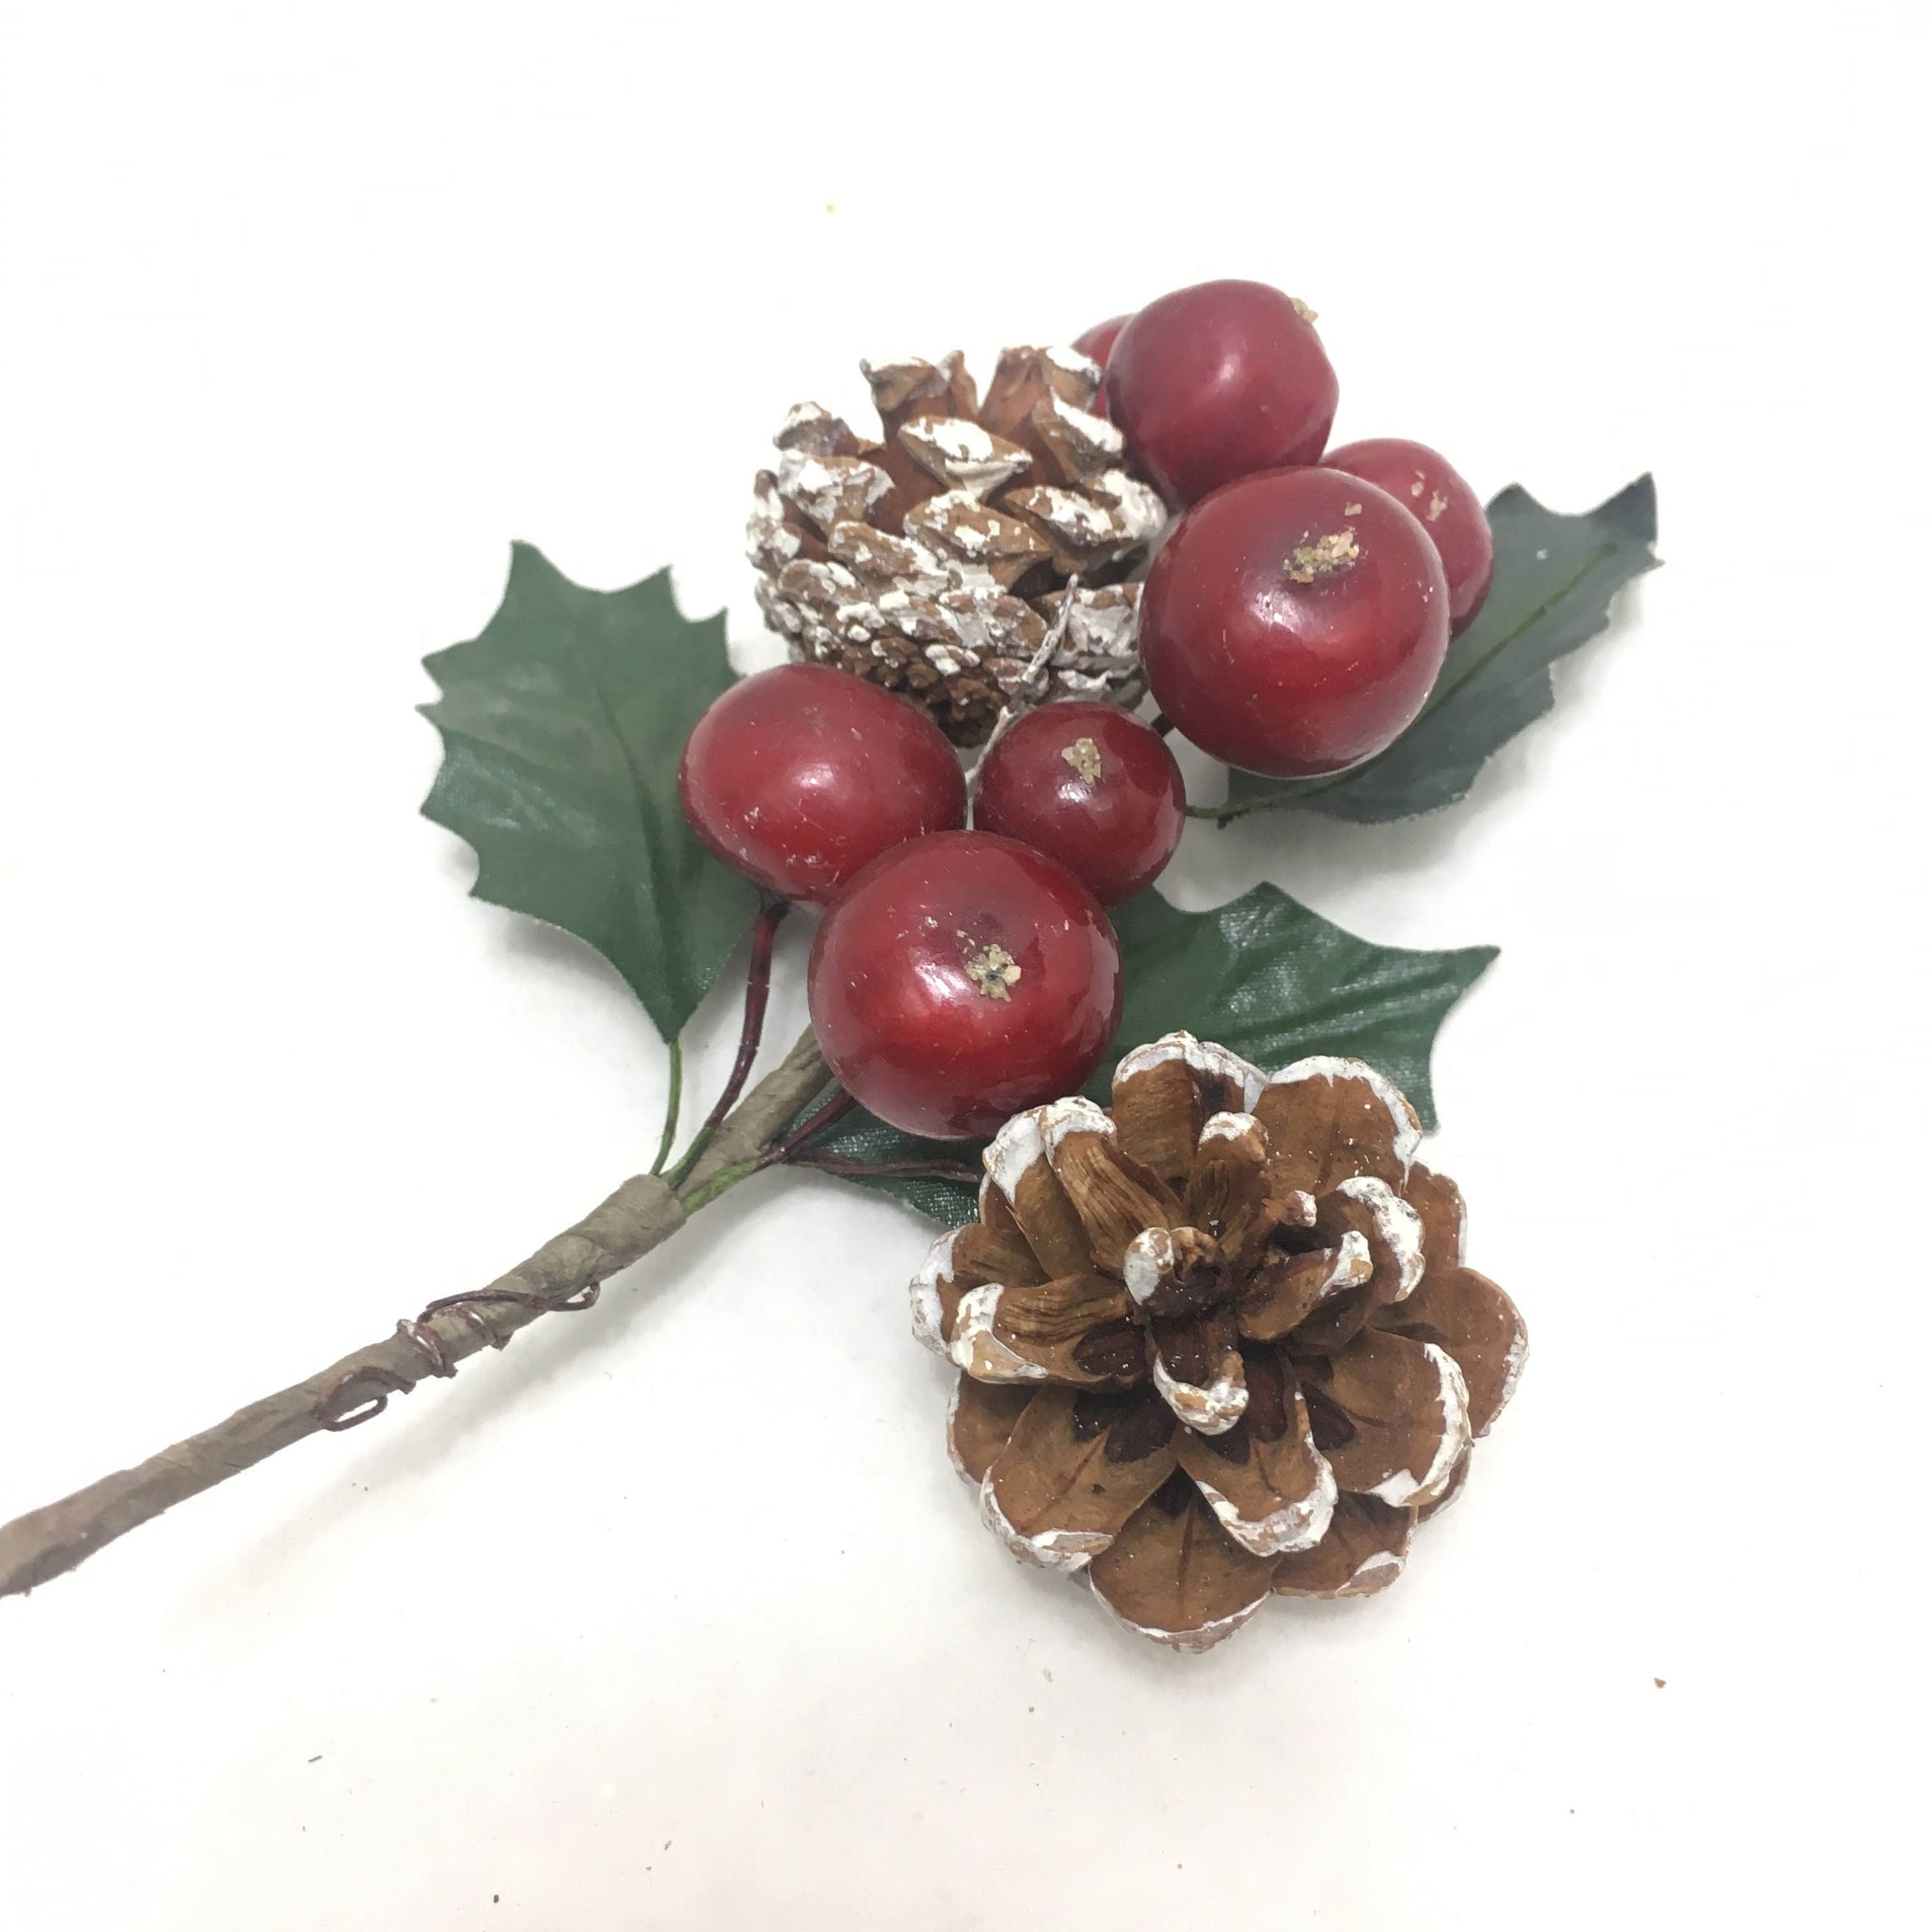 4 Natural Styled Floral Picks in Red Green and Gold Accents Cherry, Berries  and Pine Cone Christmas Gift Cluster Millinery Winter Decor 